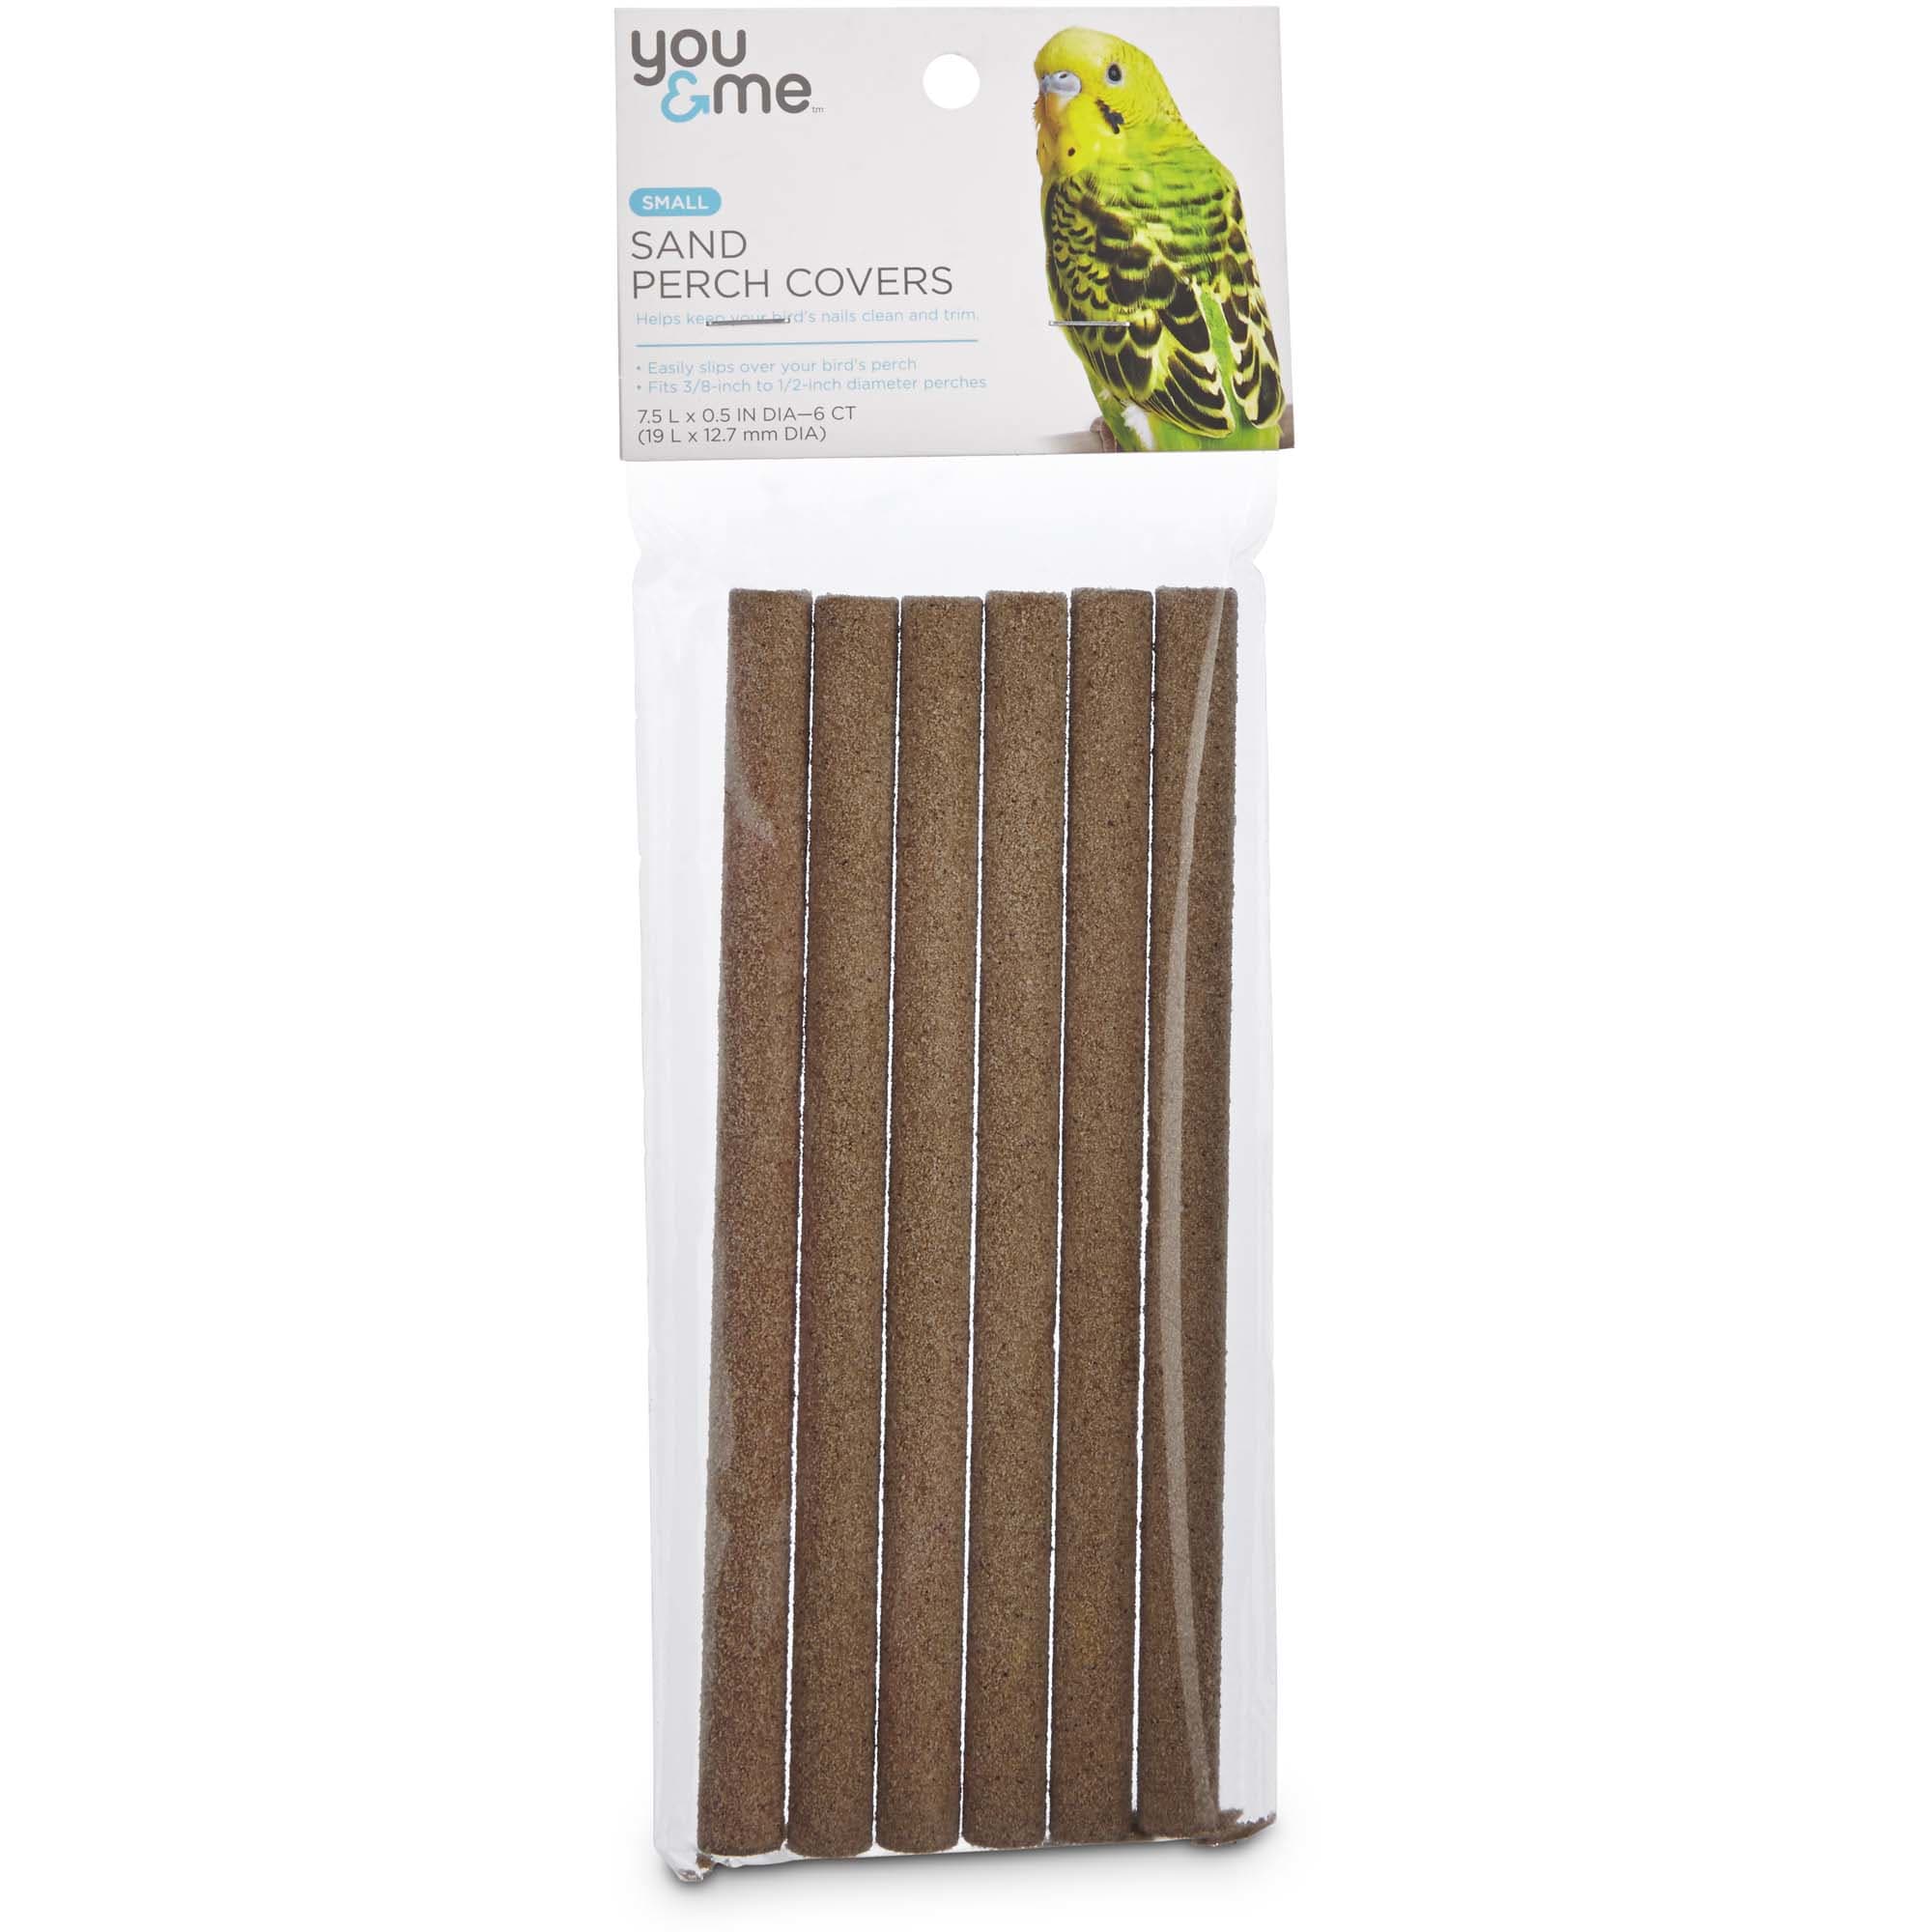 7.5 FITS 3/8 PERCH 12 X 4 PACK TOTALS 48 PERCHES HAPPYPET BUDGIE BIRD SANDED PERCH COVERS SMALL L